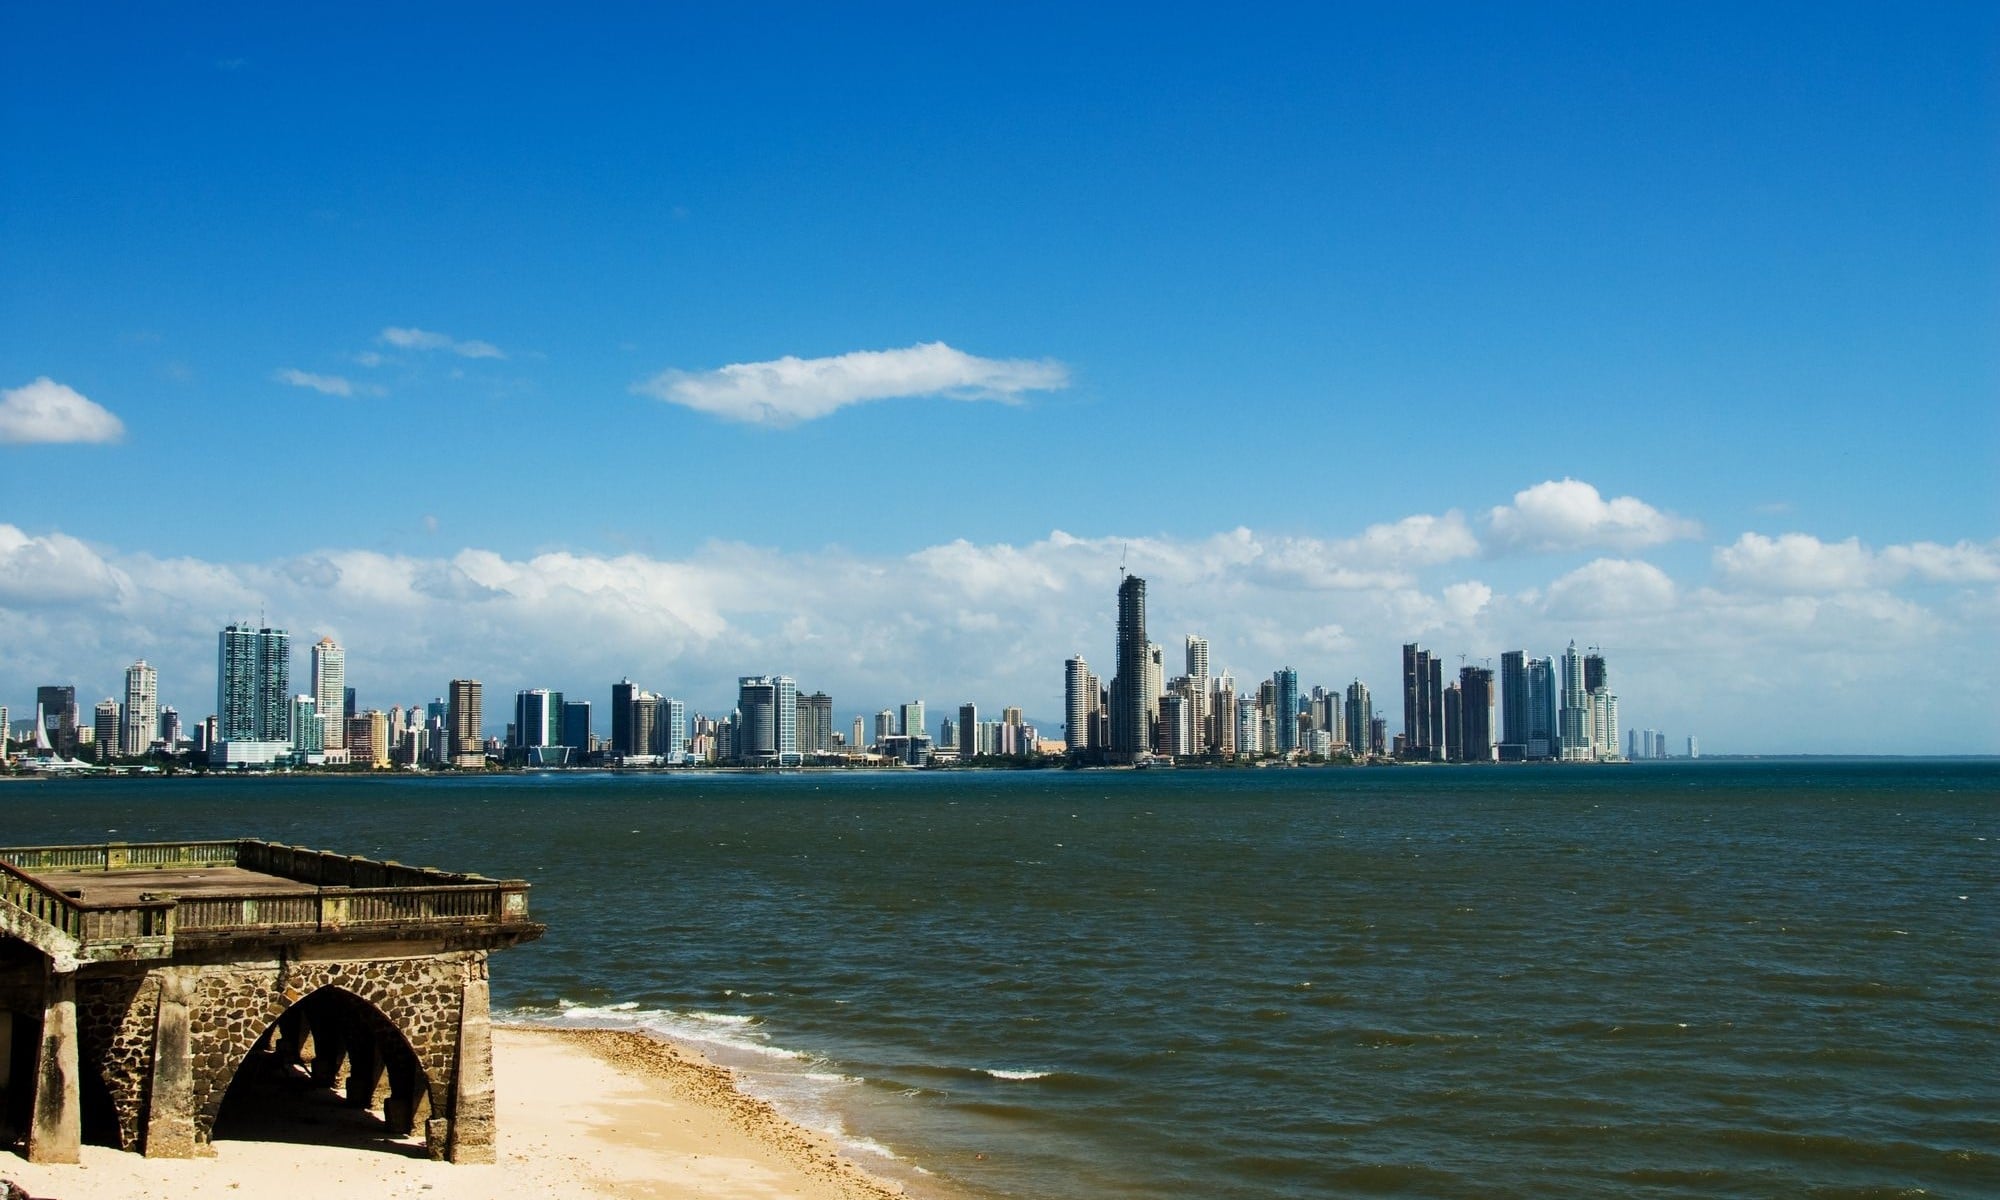 panama city with buildings by the water